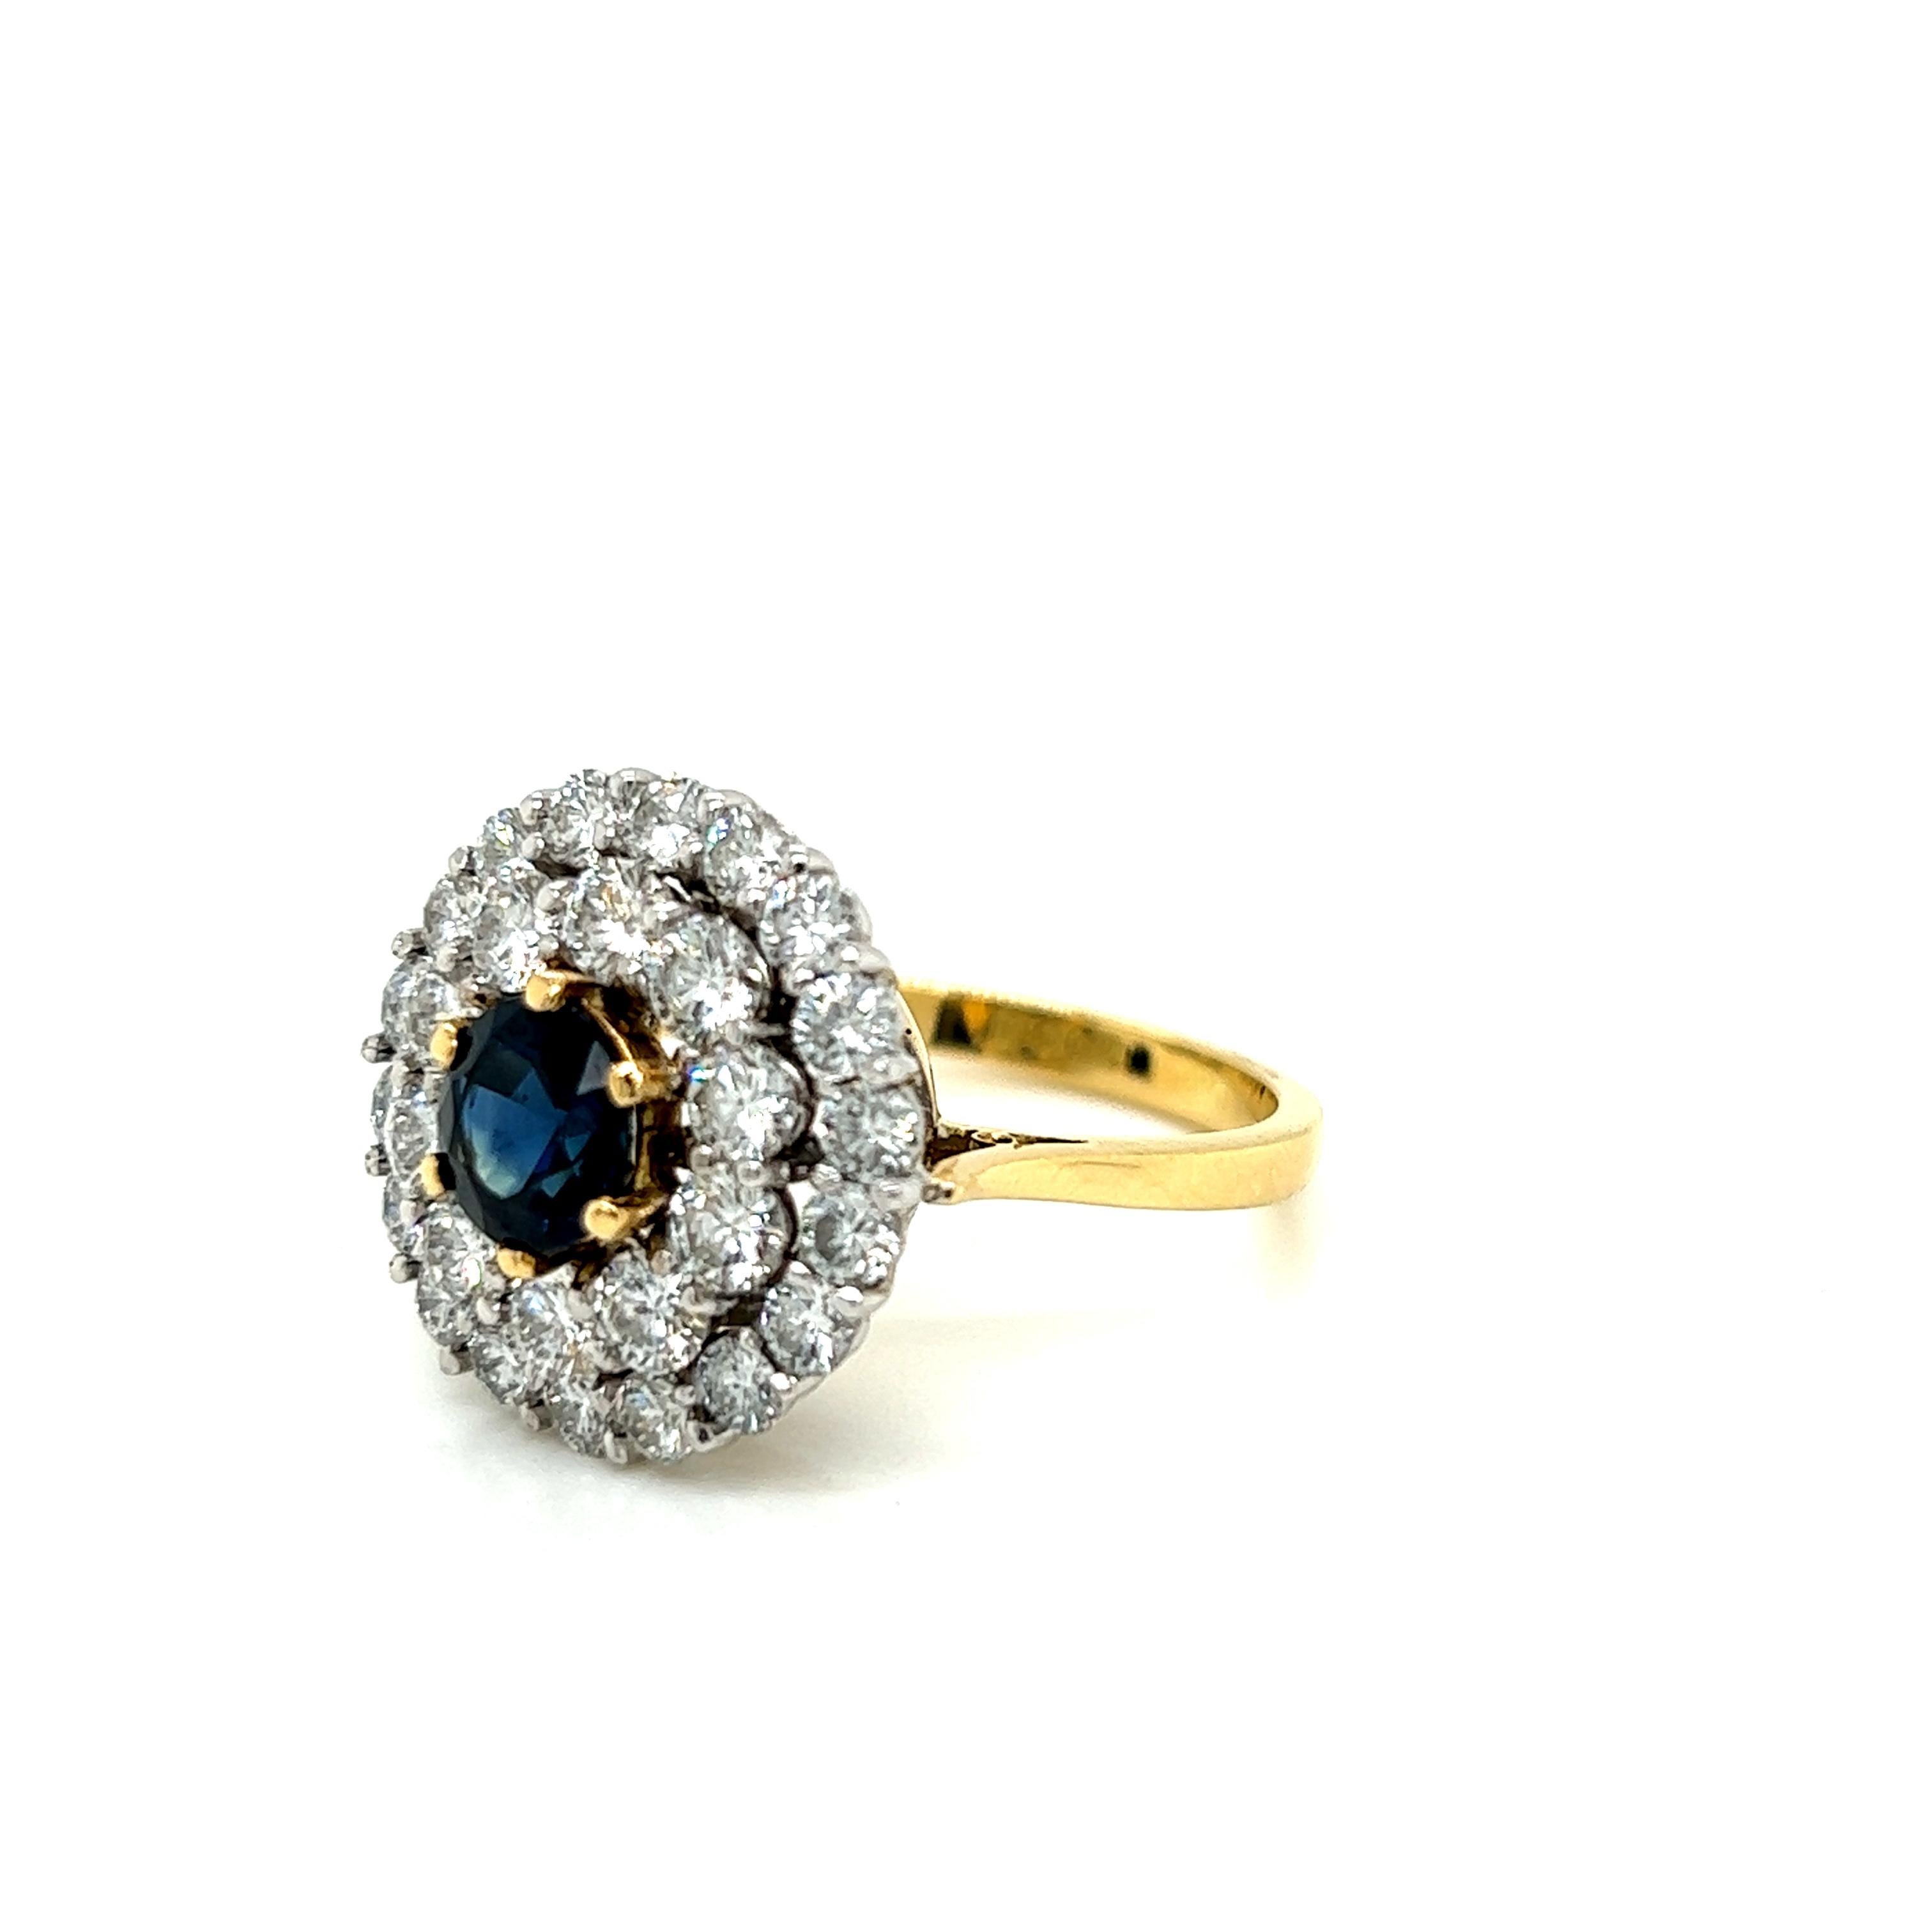 This magnificent ring features a 1.39 carat Round Brilliant Blue Sapphire at its centre, surrounded by 2.48 carats of Round Brilliant Diamonds on an 18K Yellow Gold Ring. The diamonds are set in 18K White Gold, and their arrangement gives the effect